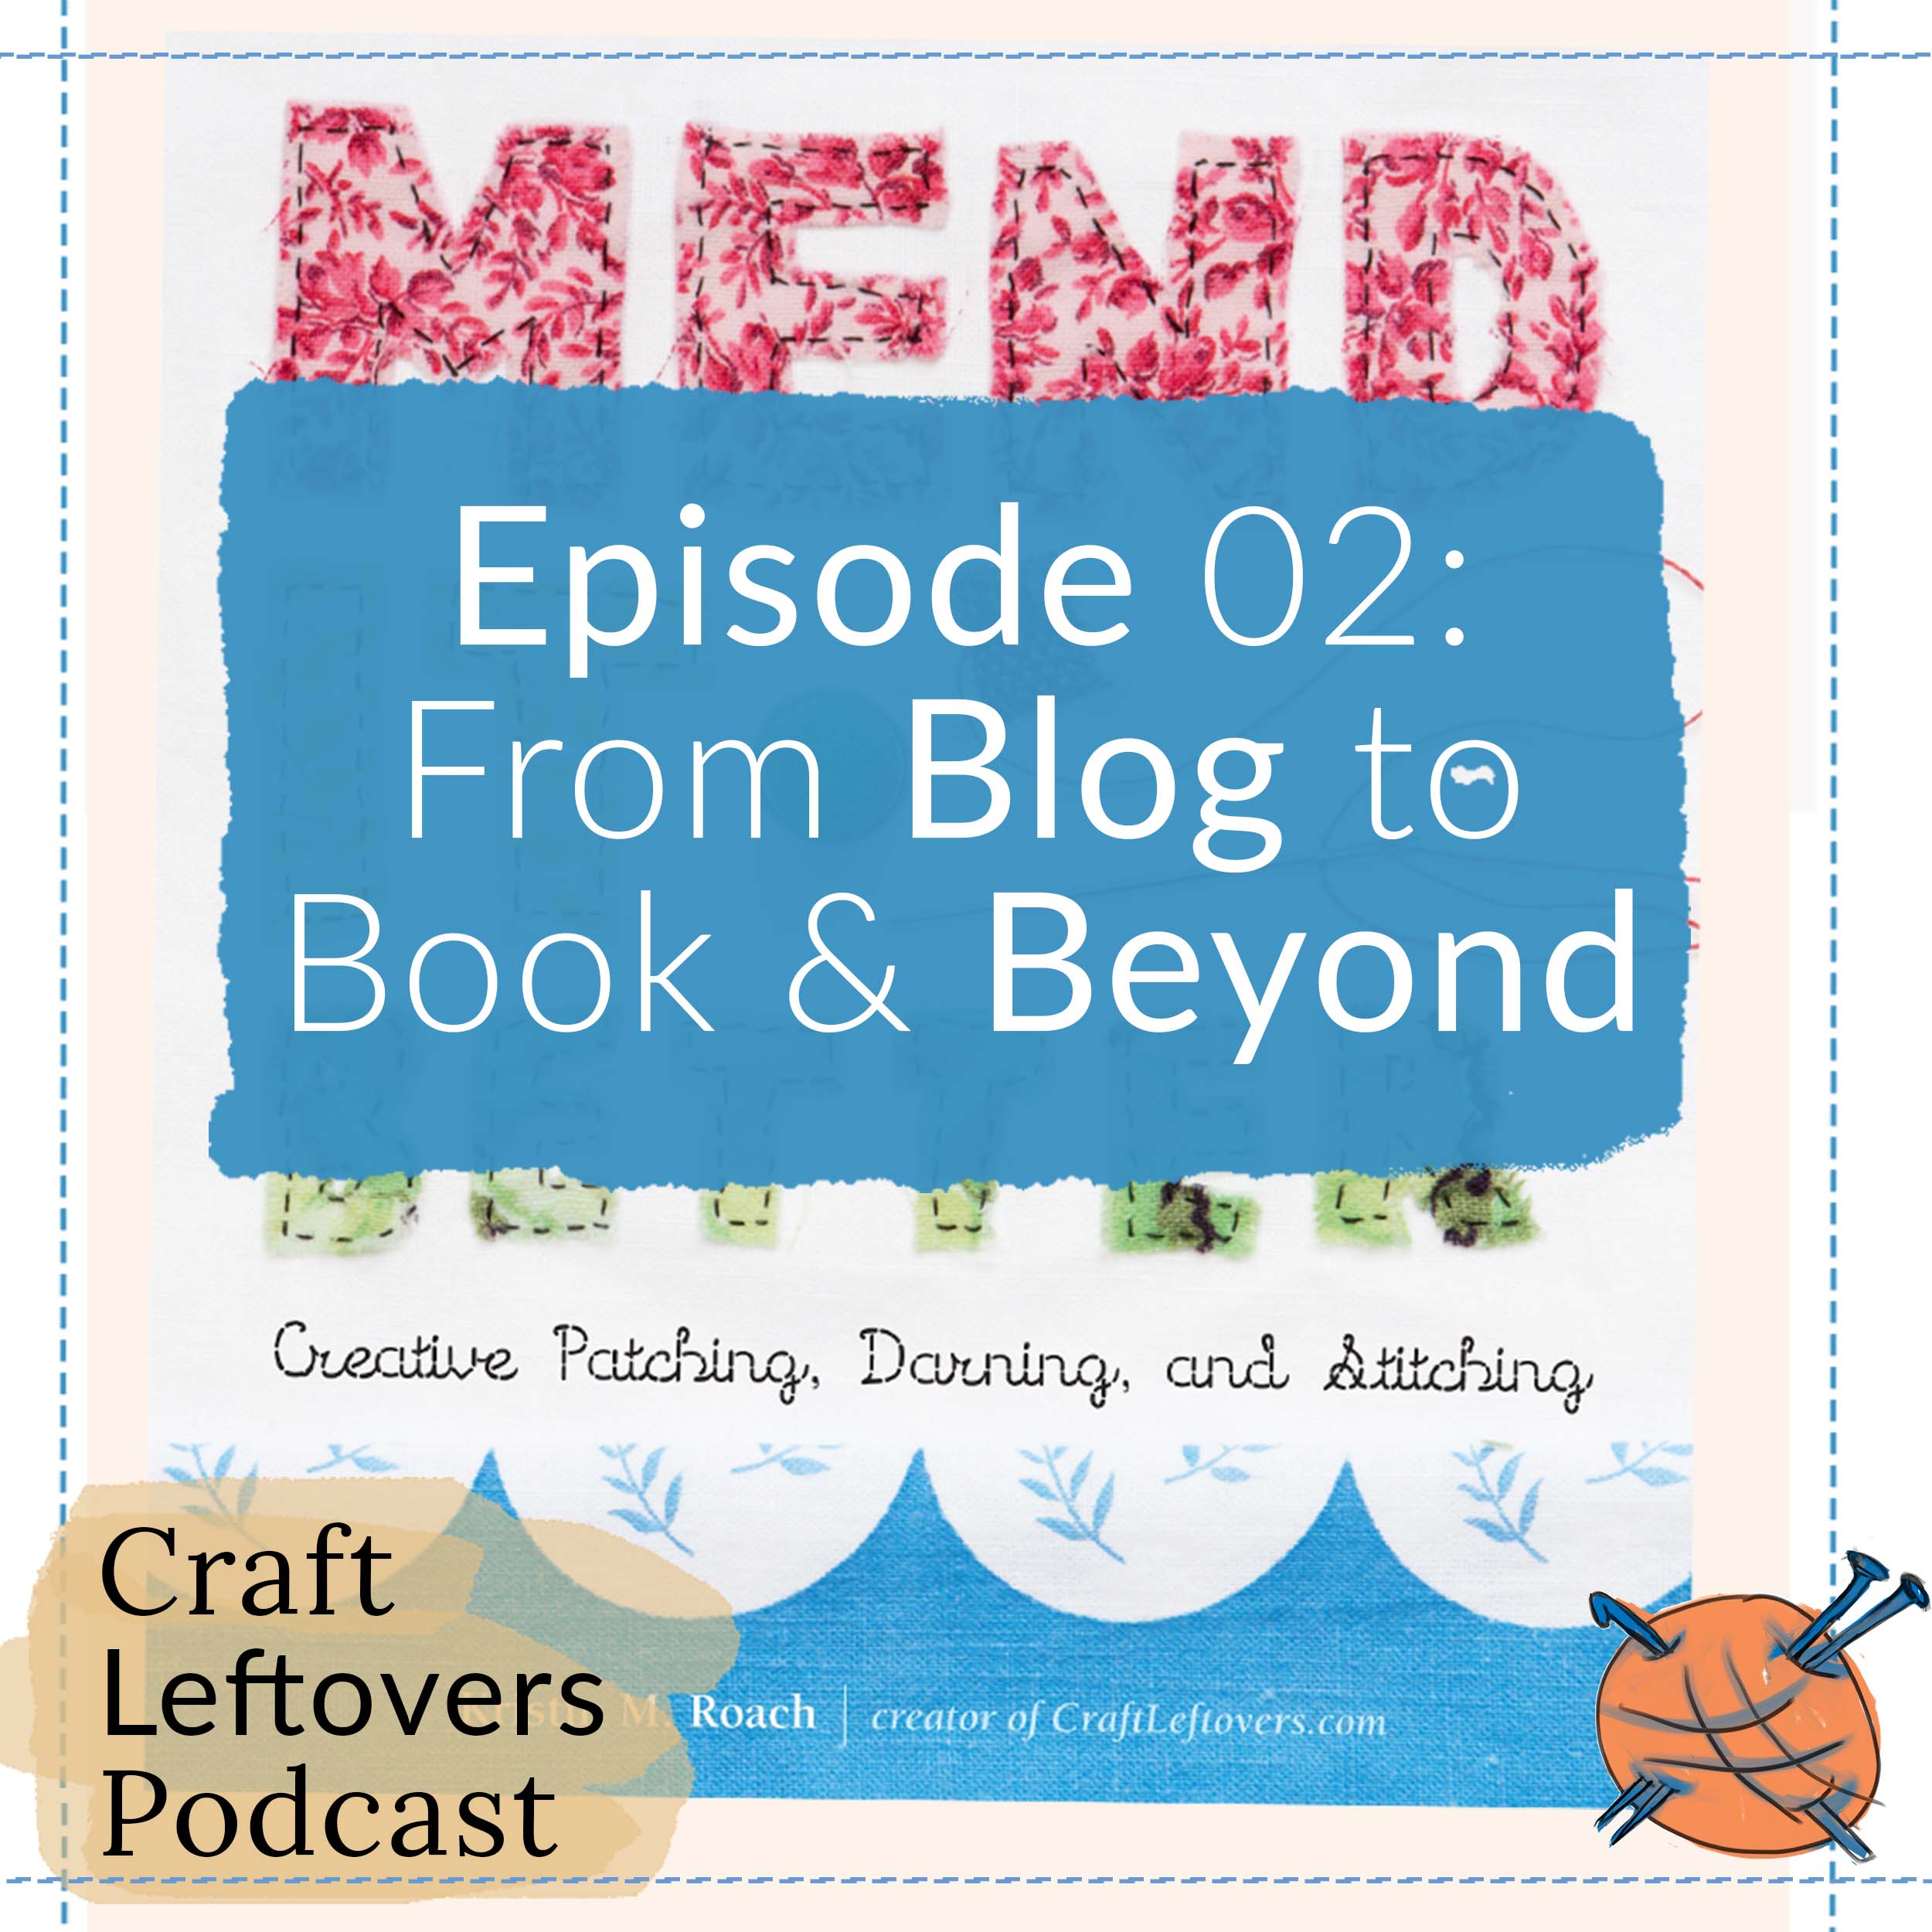 Ep 2: Blog to Book & Beyond: Craft Leftovers Podcast